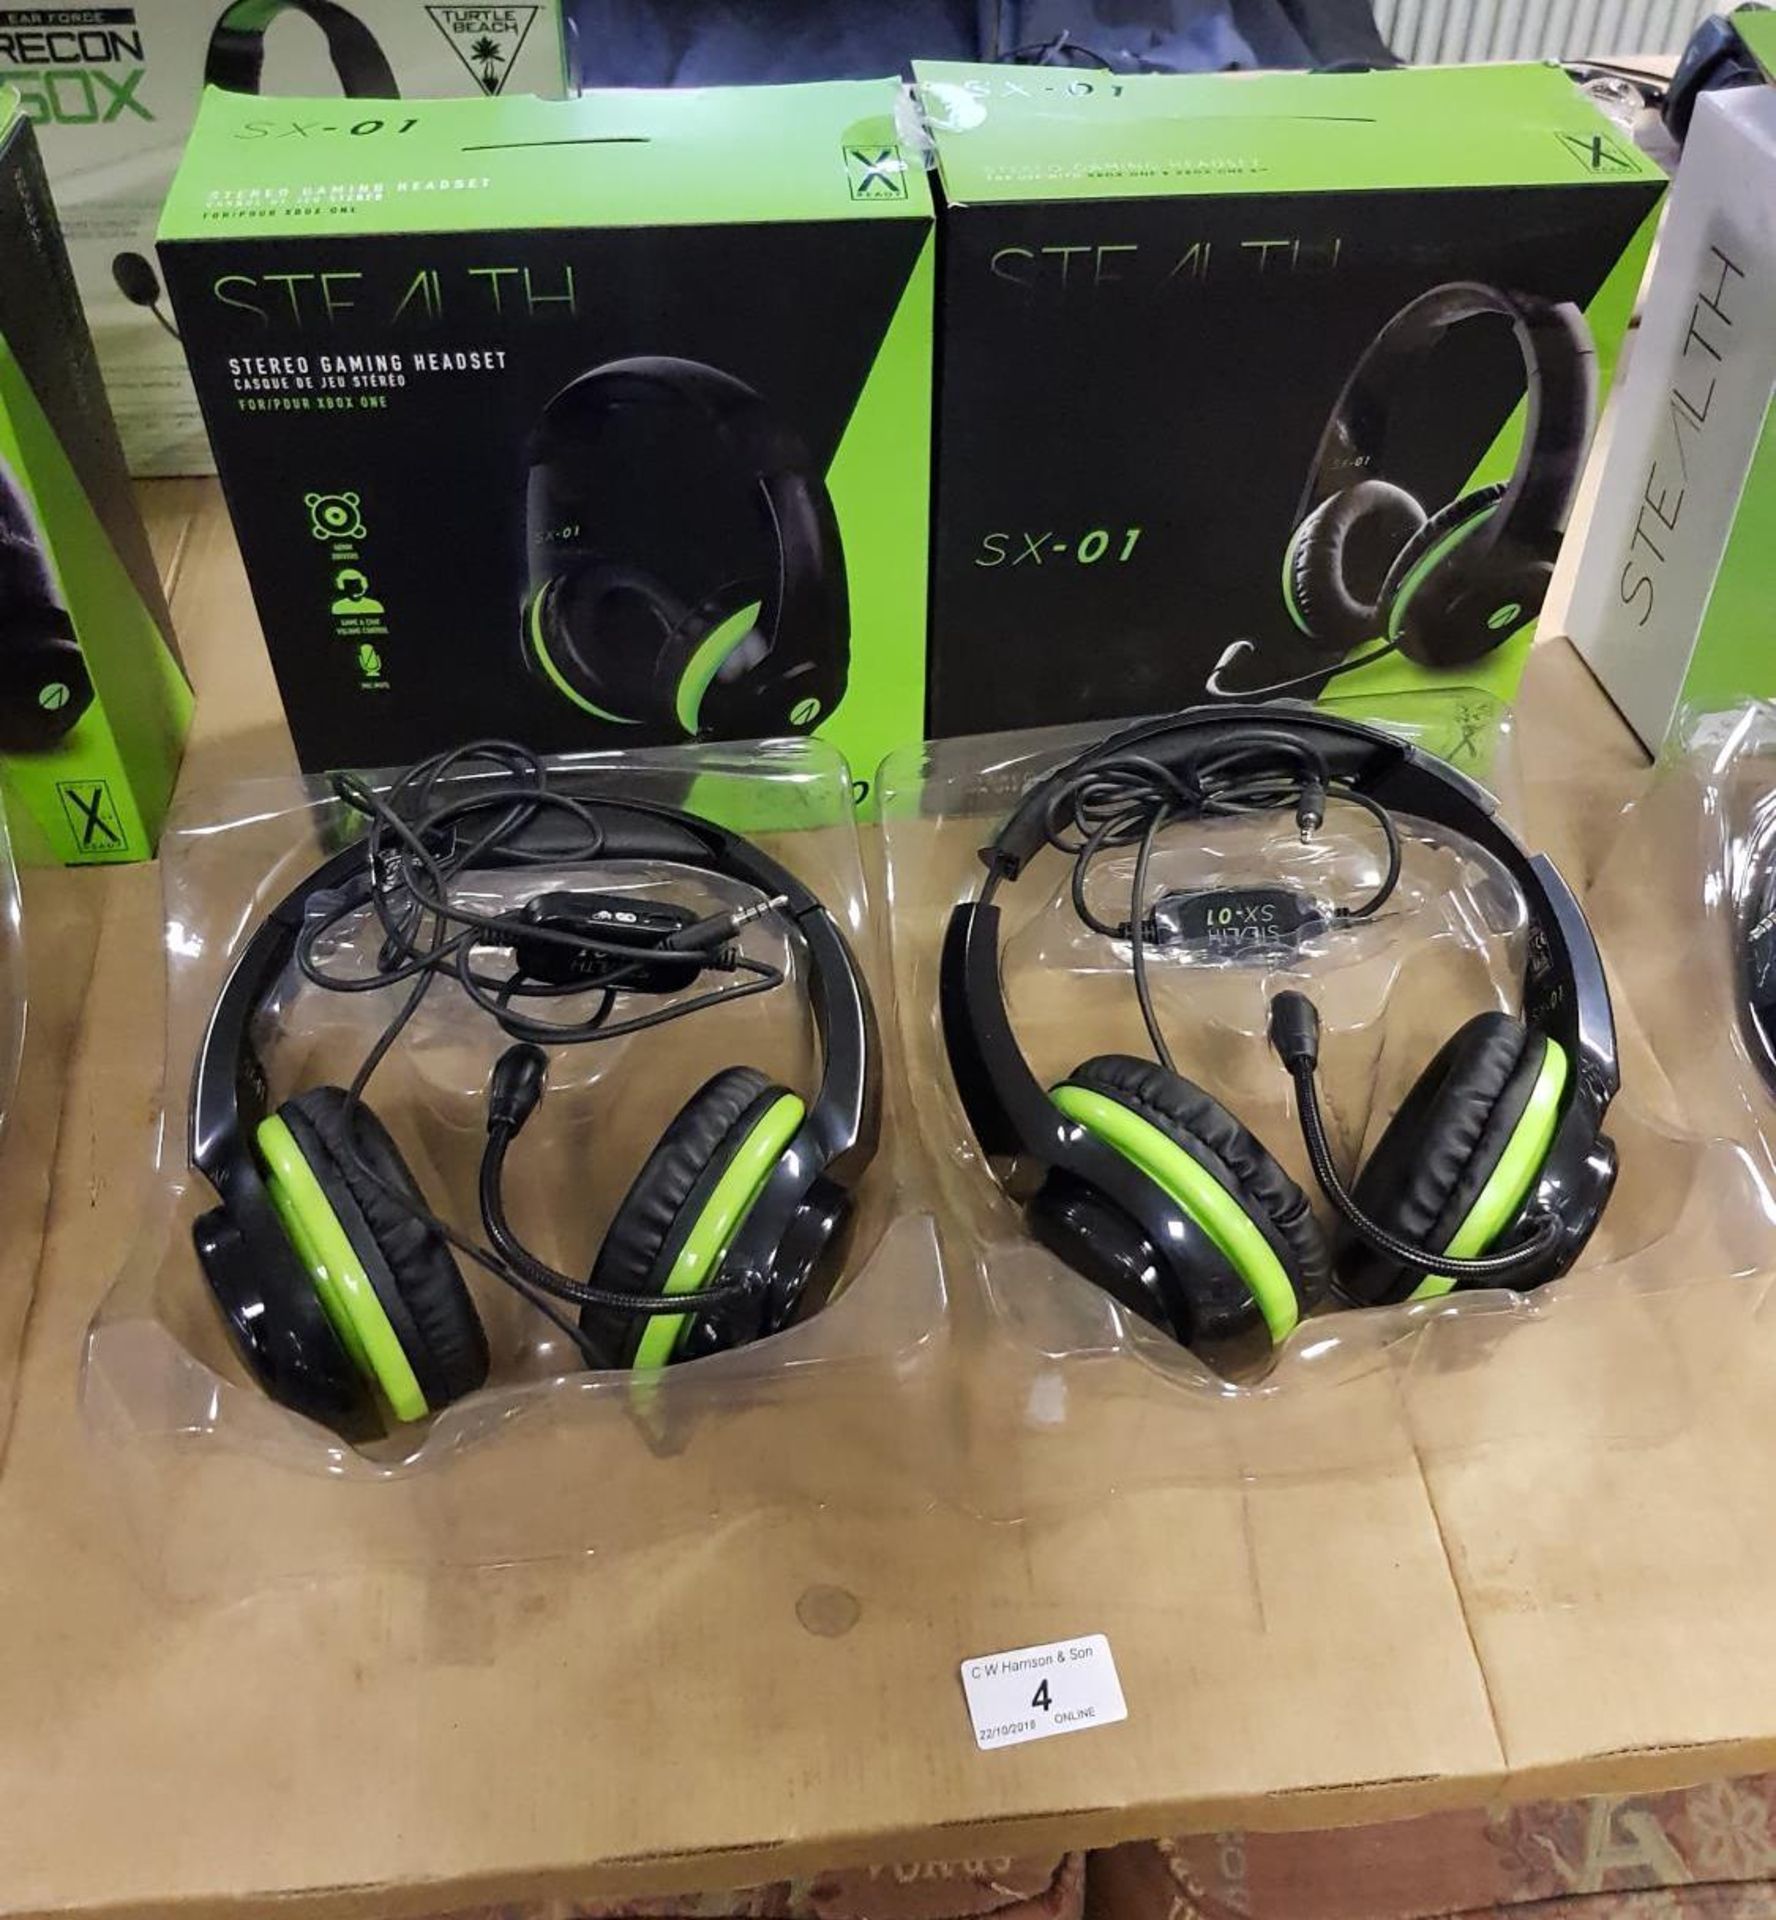 (2x) Stealth SX-01 Xbox Gaming Headsets